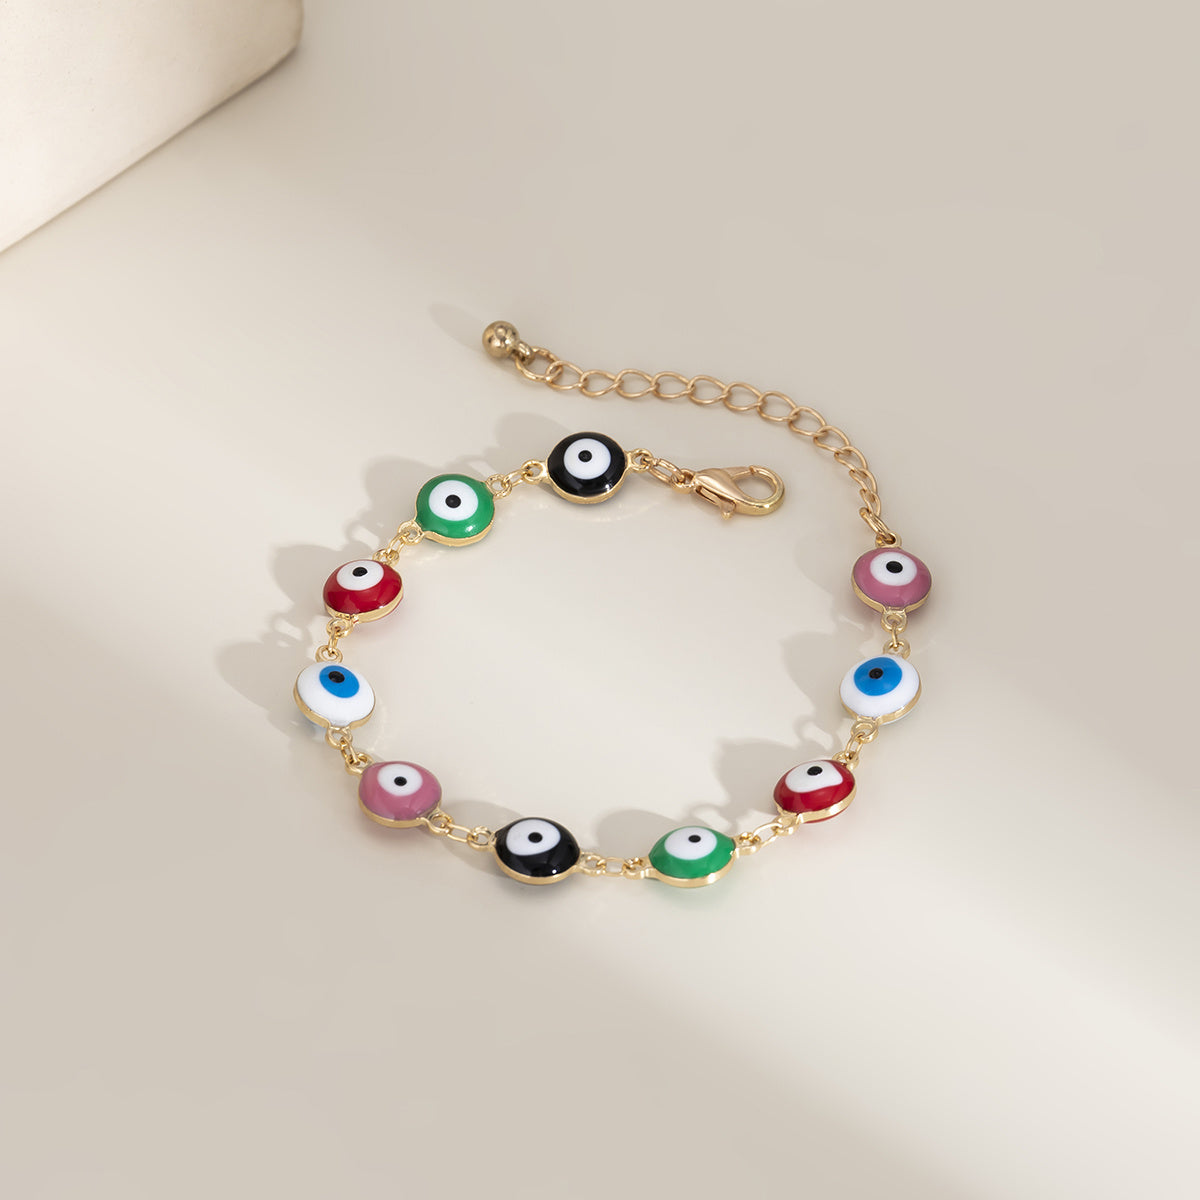 1 Piece Colored Oil Eye Necklace Bracelet Women's Accessories Fashion 2022 Fall